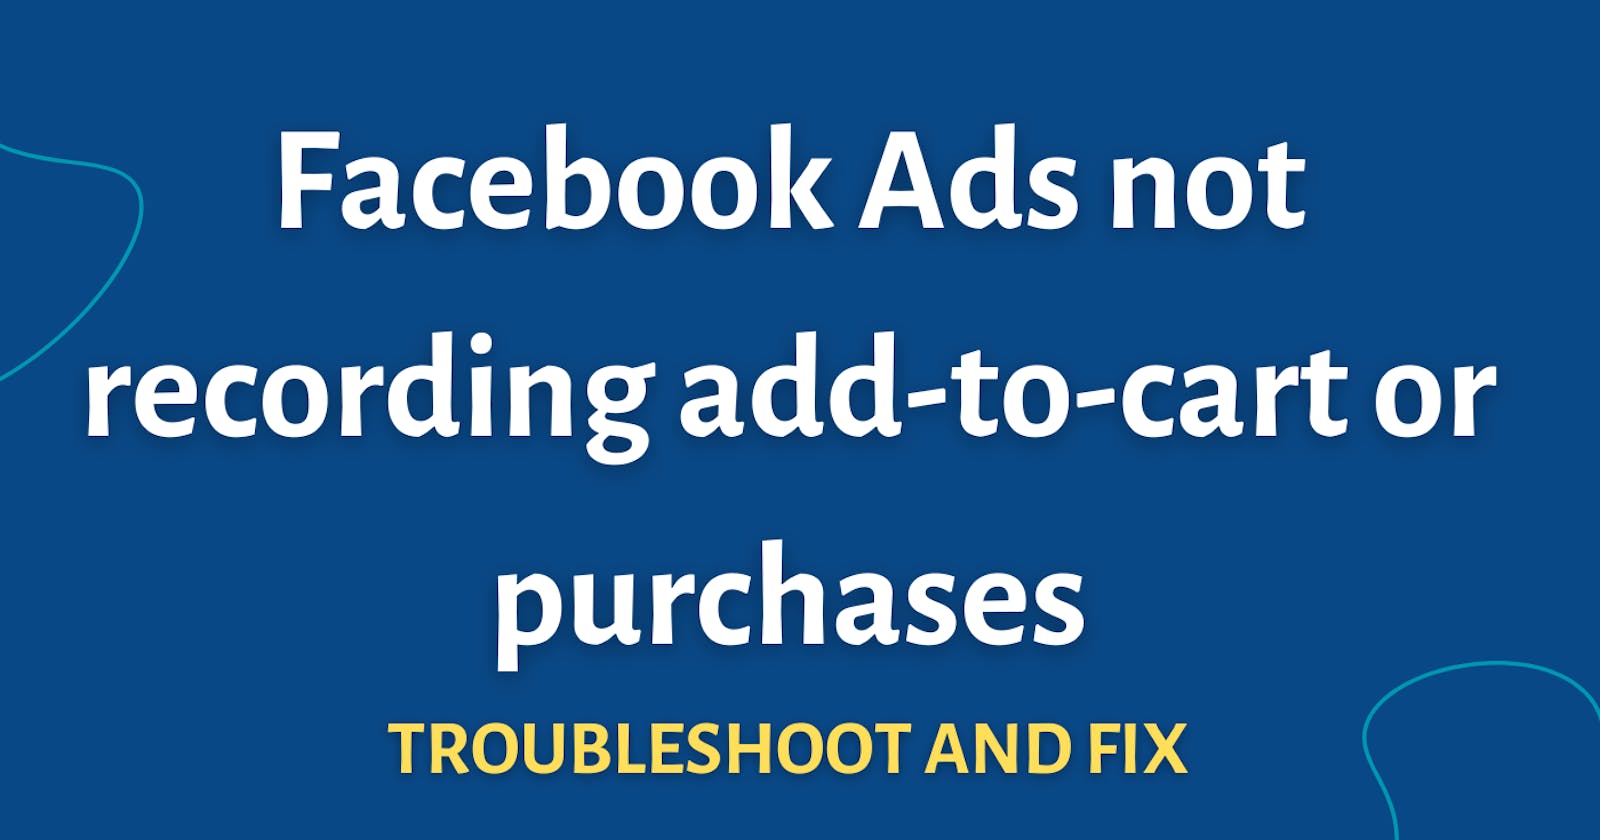 Facebook (Meta) Ads Not Recording Add-To-Cart or Purchases?